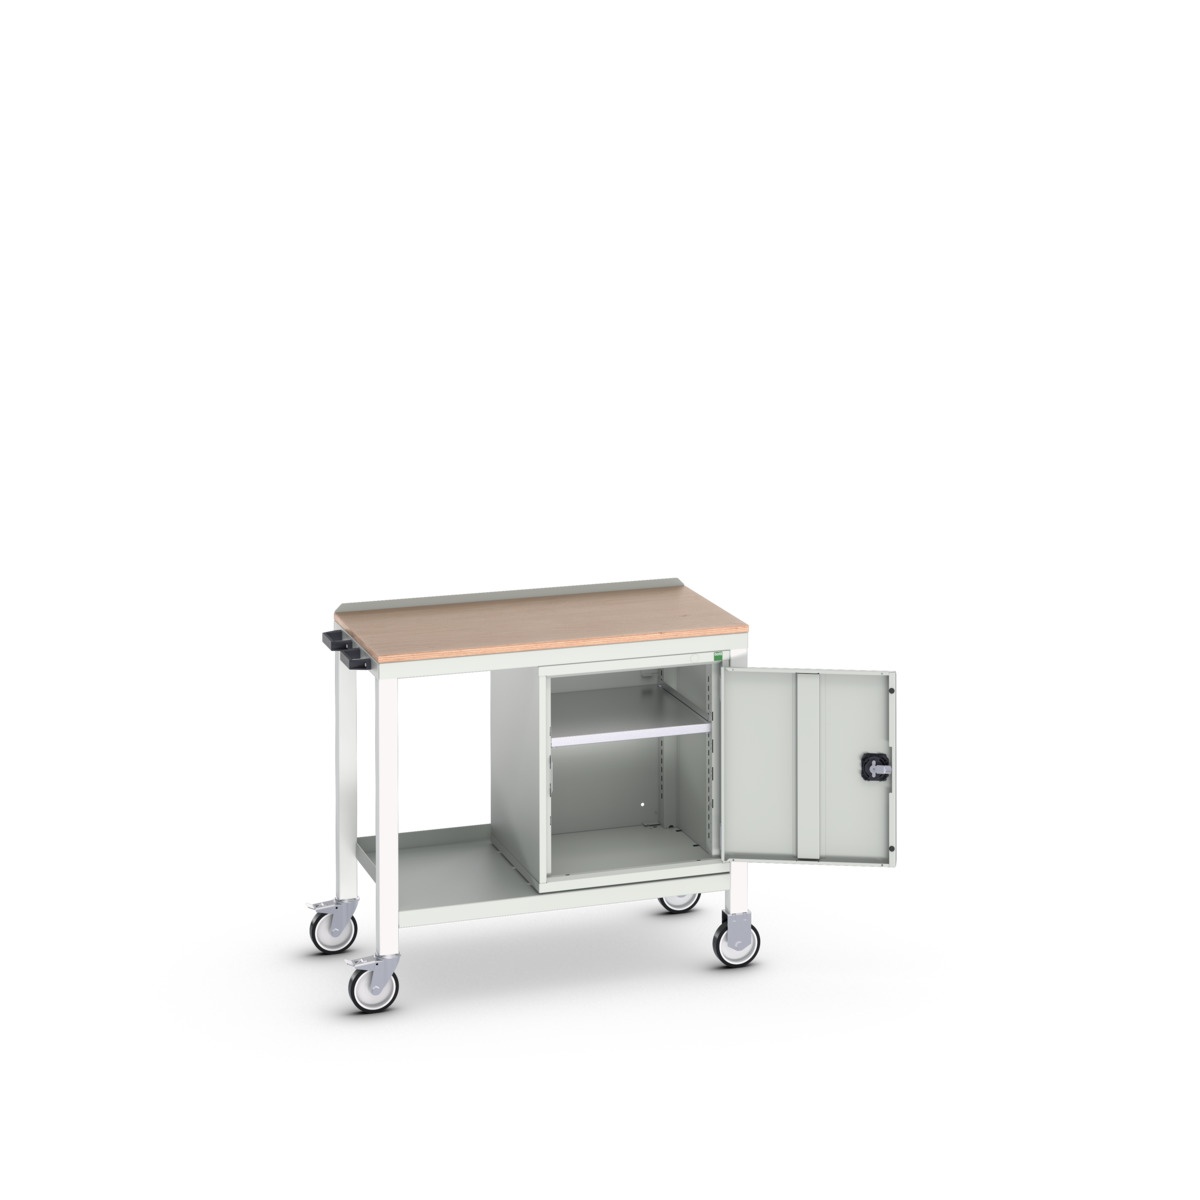 16922803.16 - verso mobile welded bench